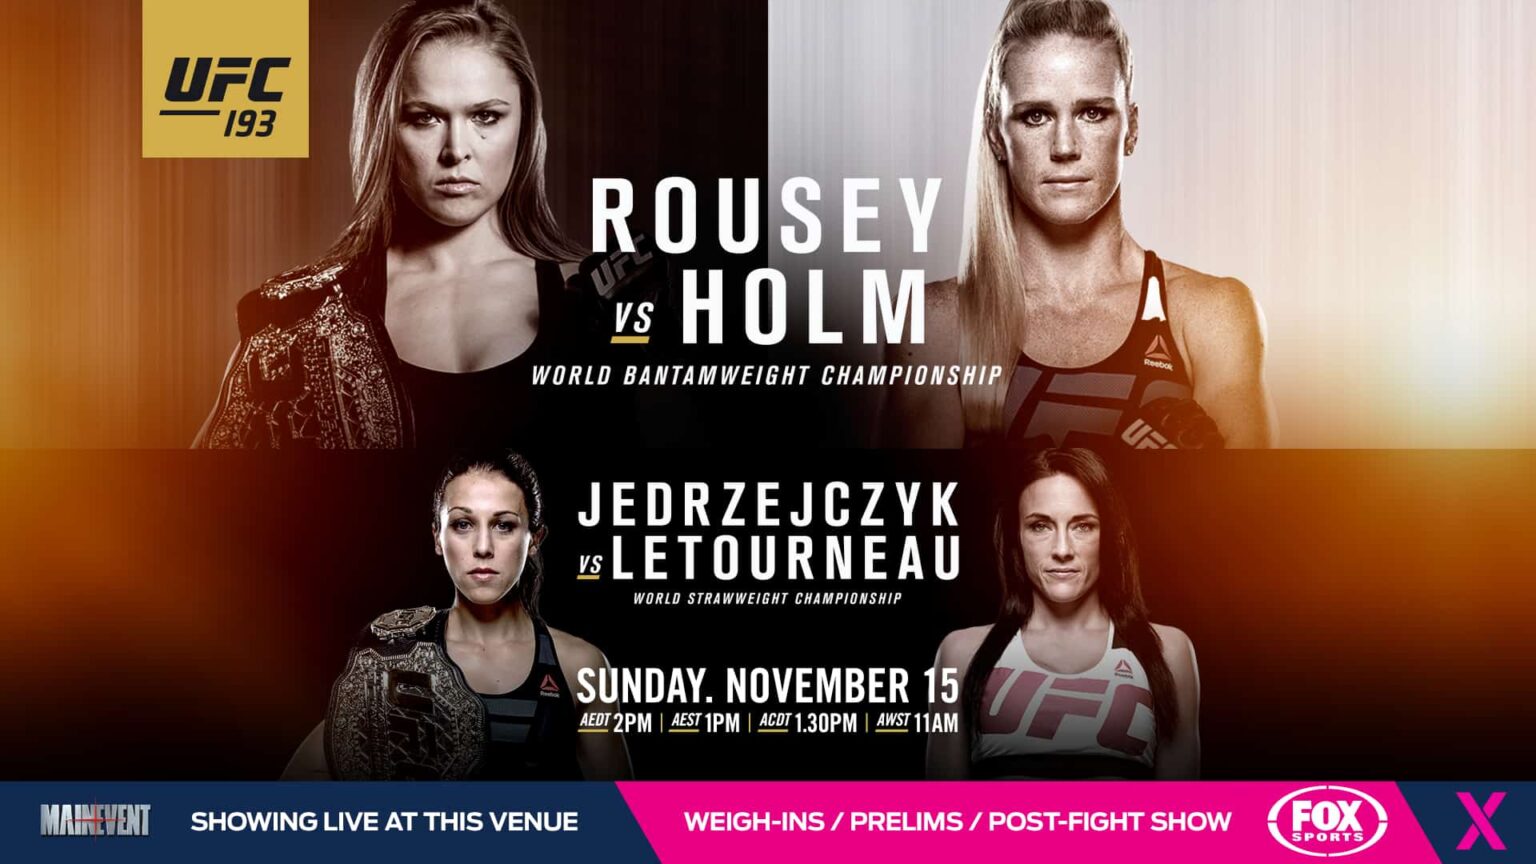 Holly Holm spars with fan, scaring UFC193 ahead of Ronda 